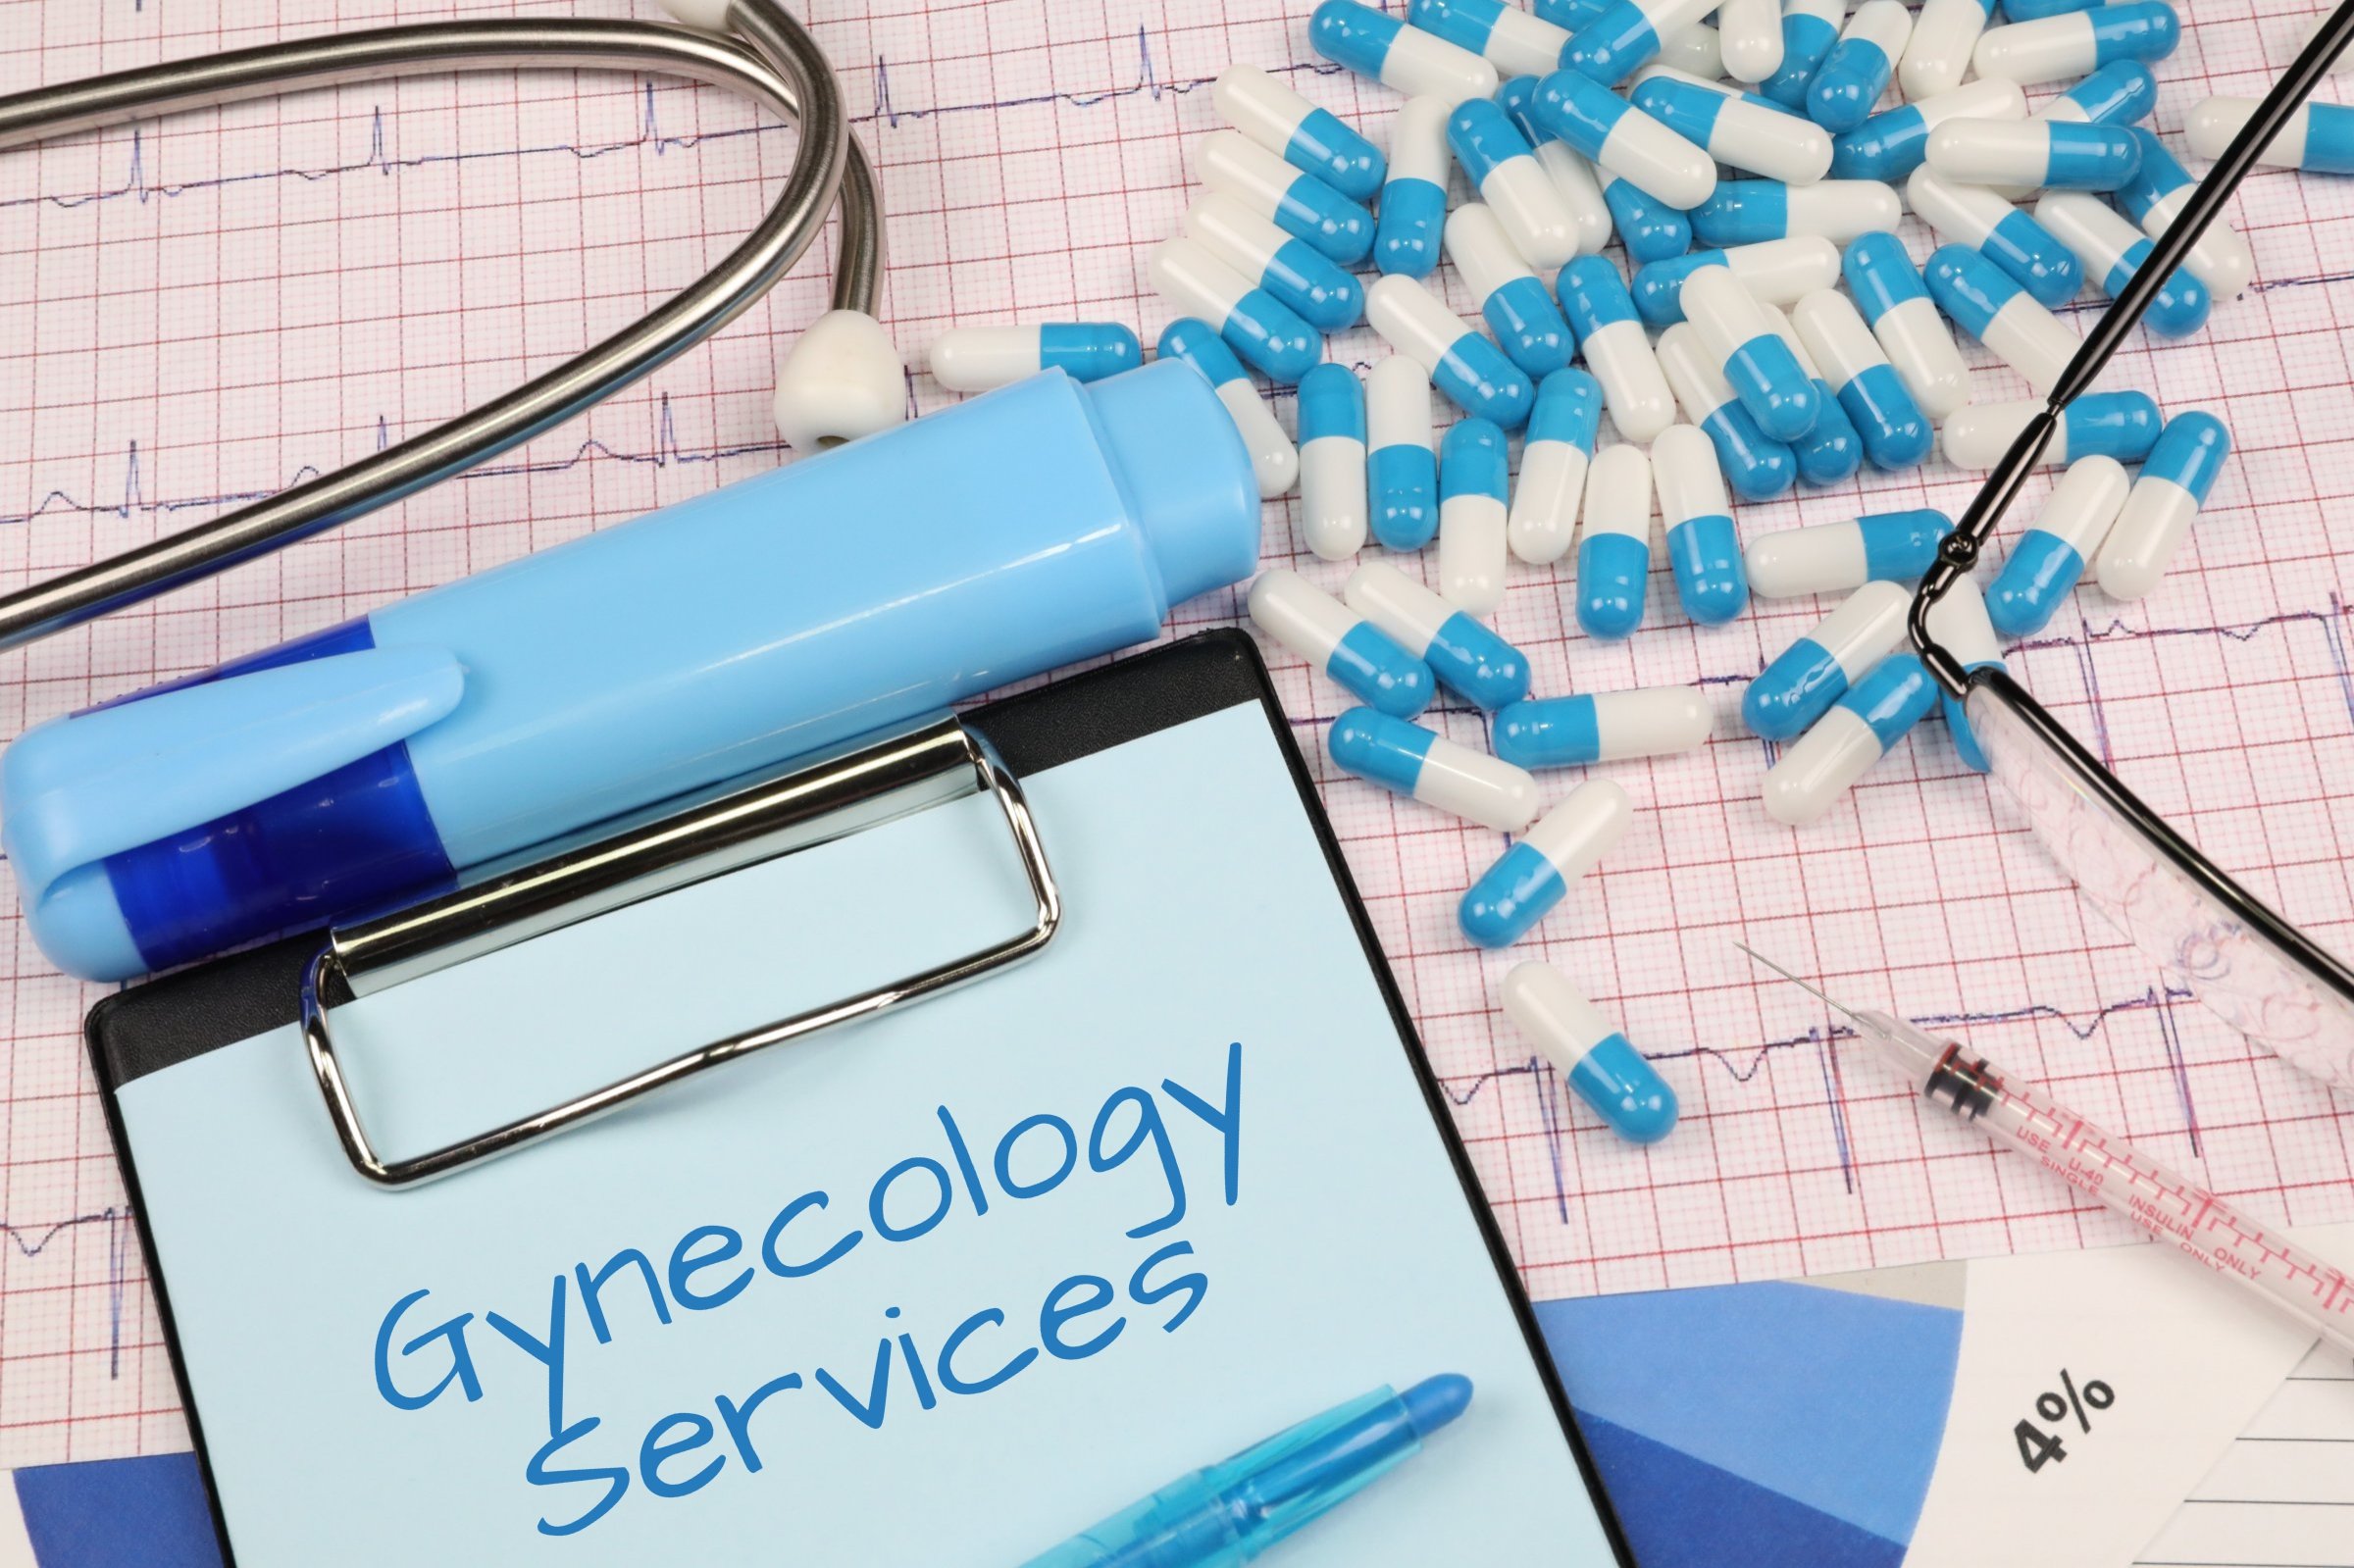 gynecology services